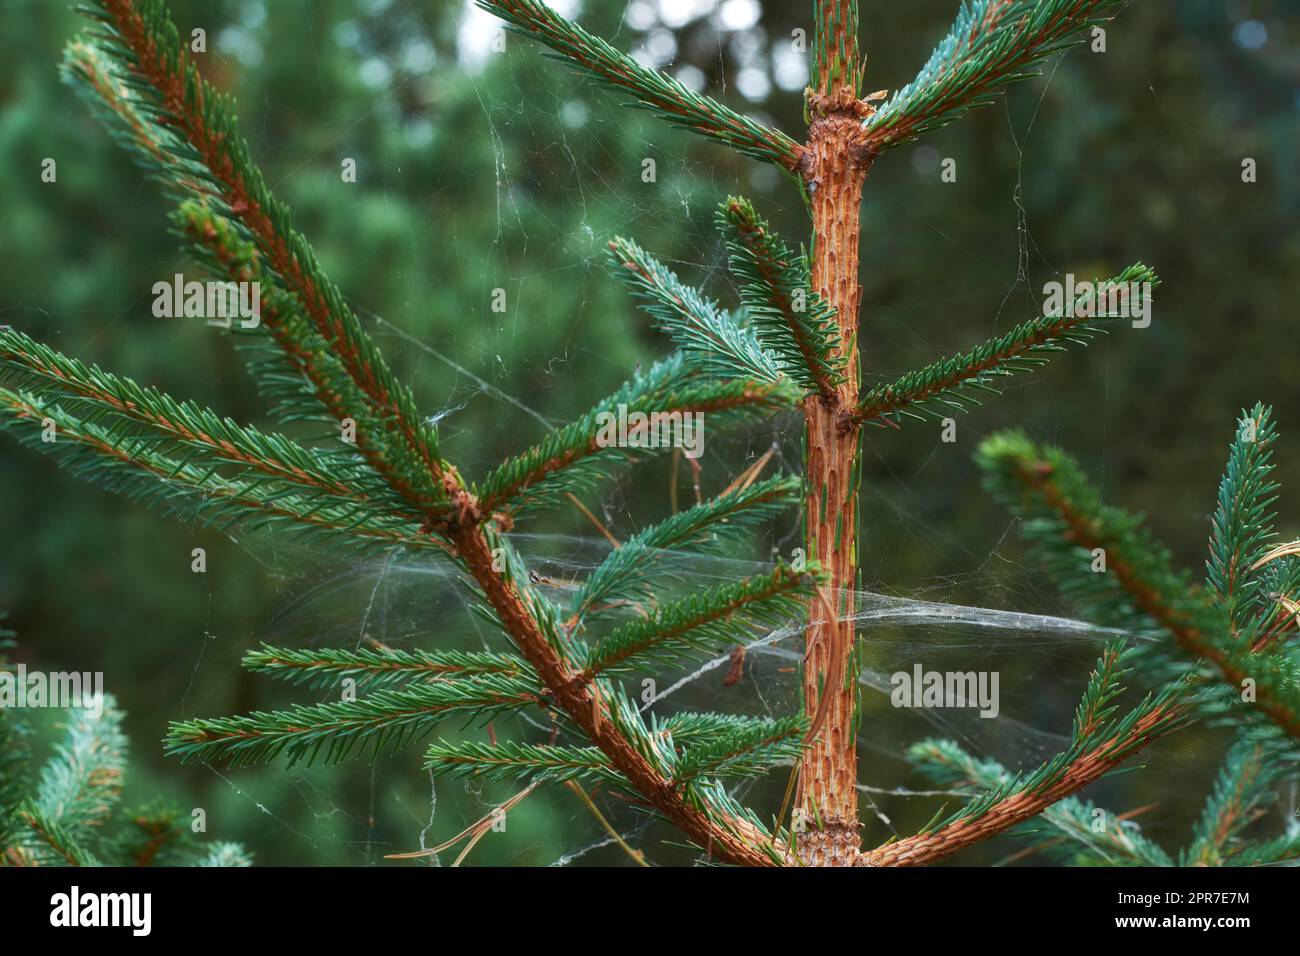 Closeup of a pine tree with webs between the branches in a wild forest. Green vegetation with cobwebs growing in untouched nature in a secluded, uncultivated environment on a bright and beautiful day Stock Photo